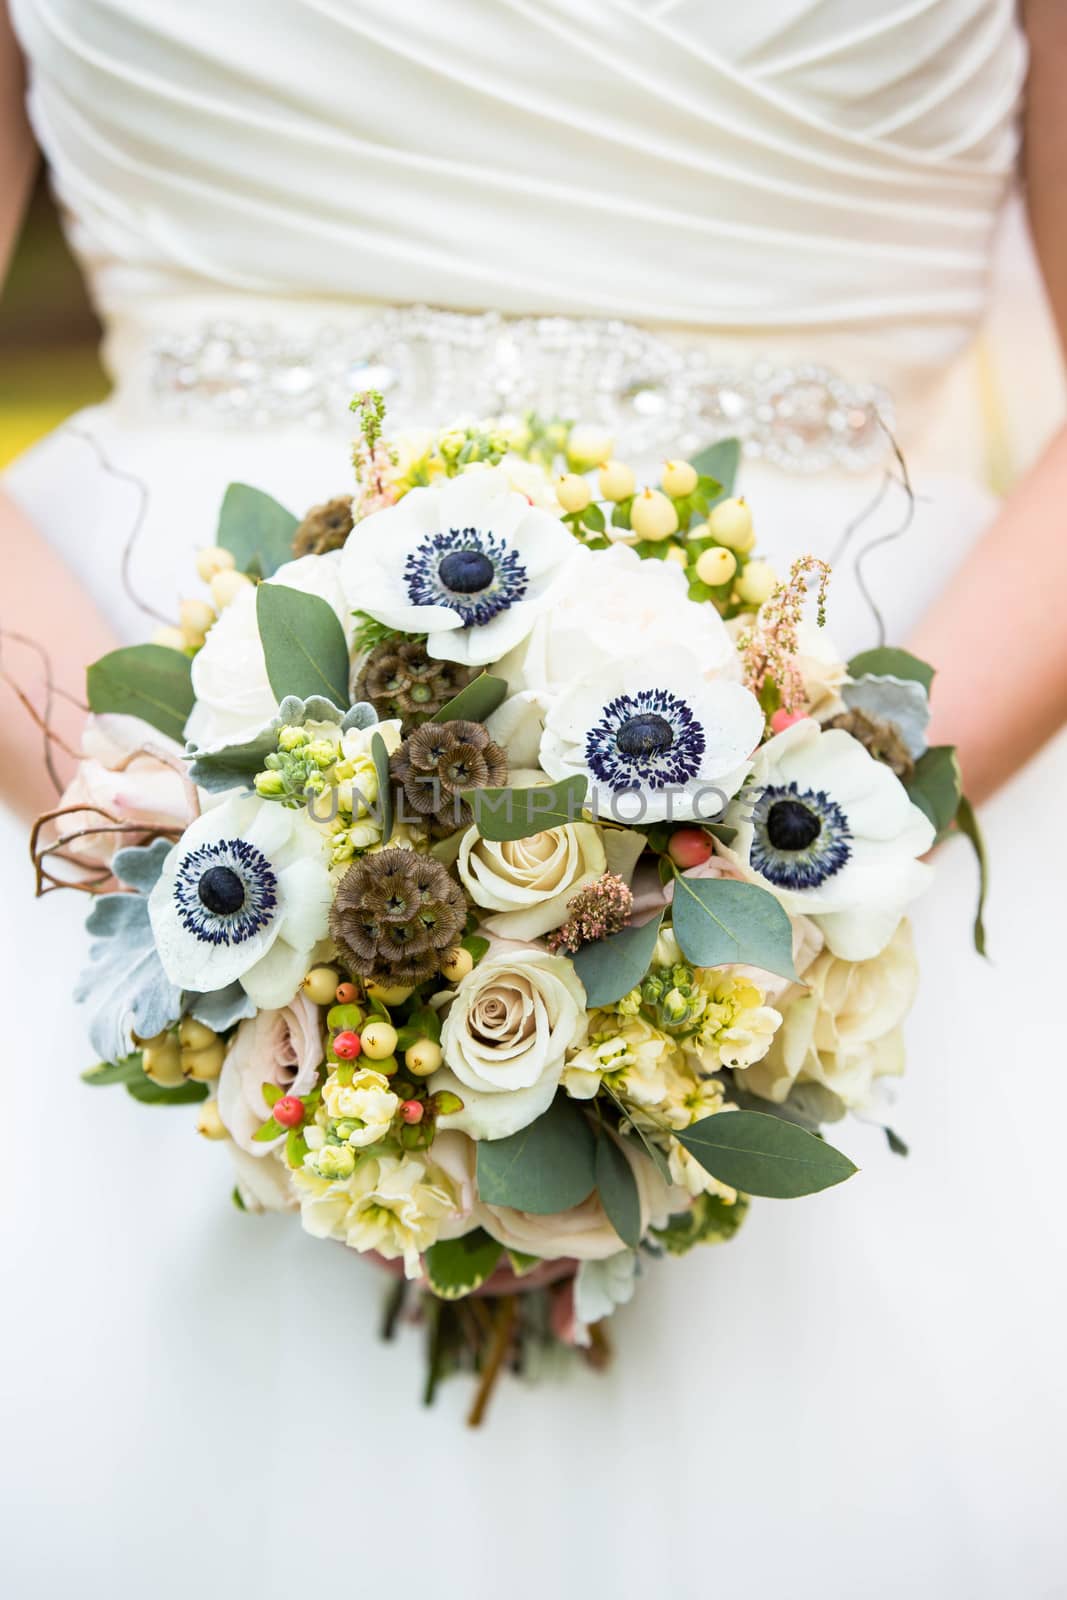 Close Up of Bride's White Floral Rustic Wedding Bouquet by salejandro